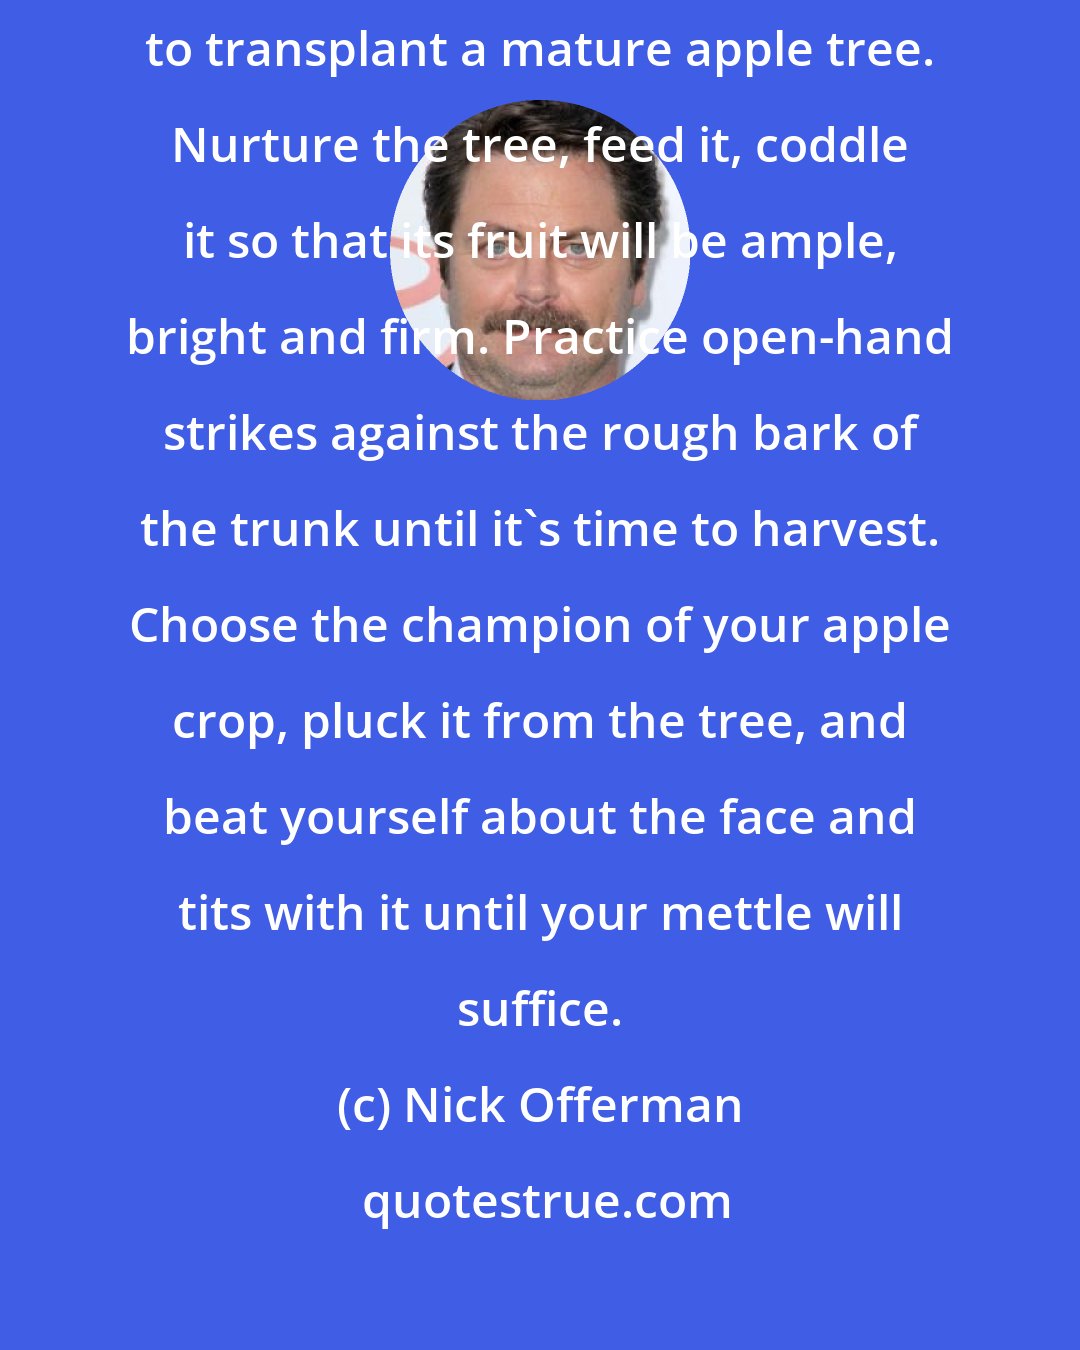 Nick Offerman: Turn off your computer and go out of doors. Dig a large enough hole to transplant a mature apple tree. Nurture the tree, feed it, coddle it so that its fruit will be ample, bright and firm. Practice open-hand strikes against the rough bark of the trunk until it's time to harvest. Choose the champion of your apple crop, pluck it from the tree, and beat yourself about the face and tits with it until your mettle will suffice.